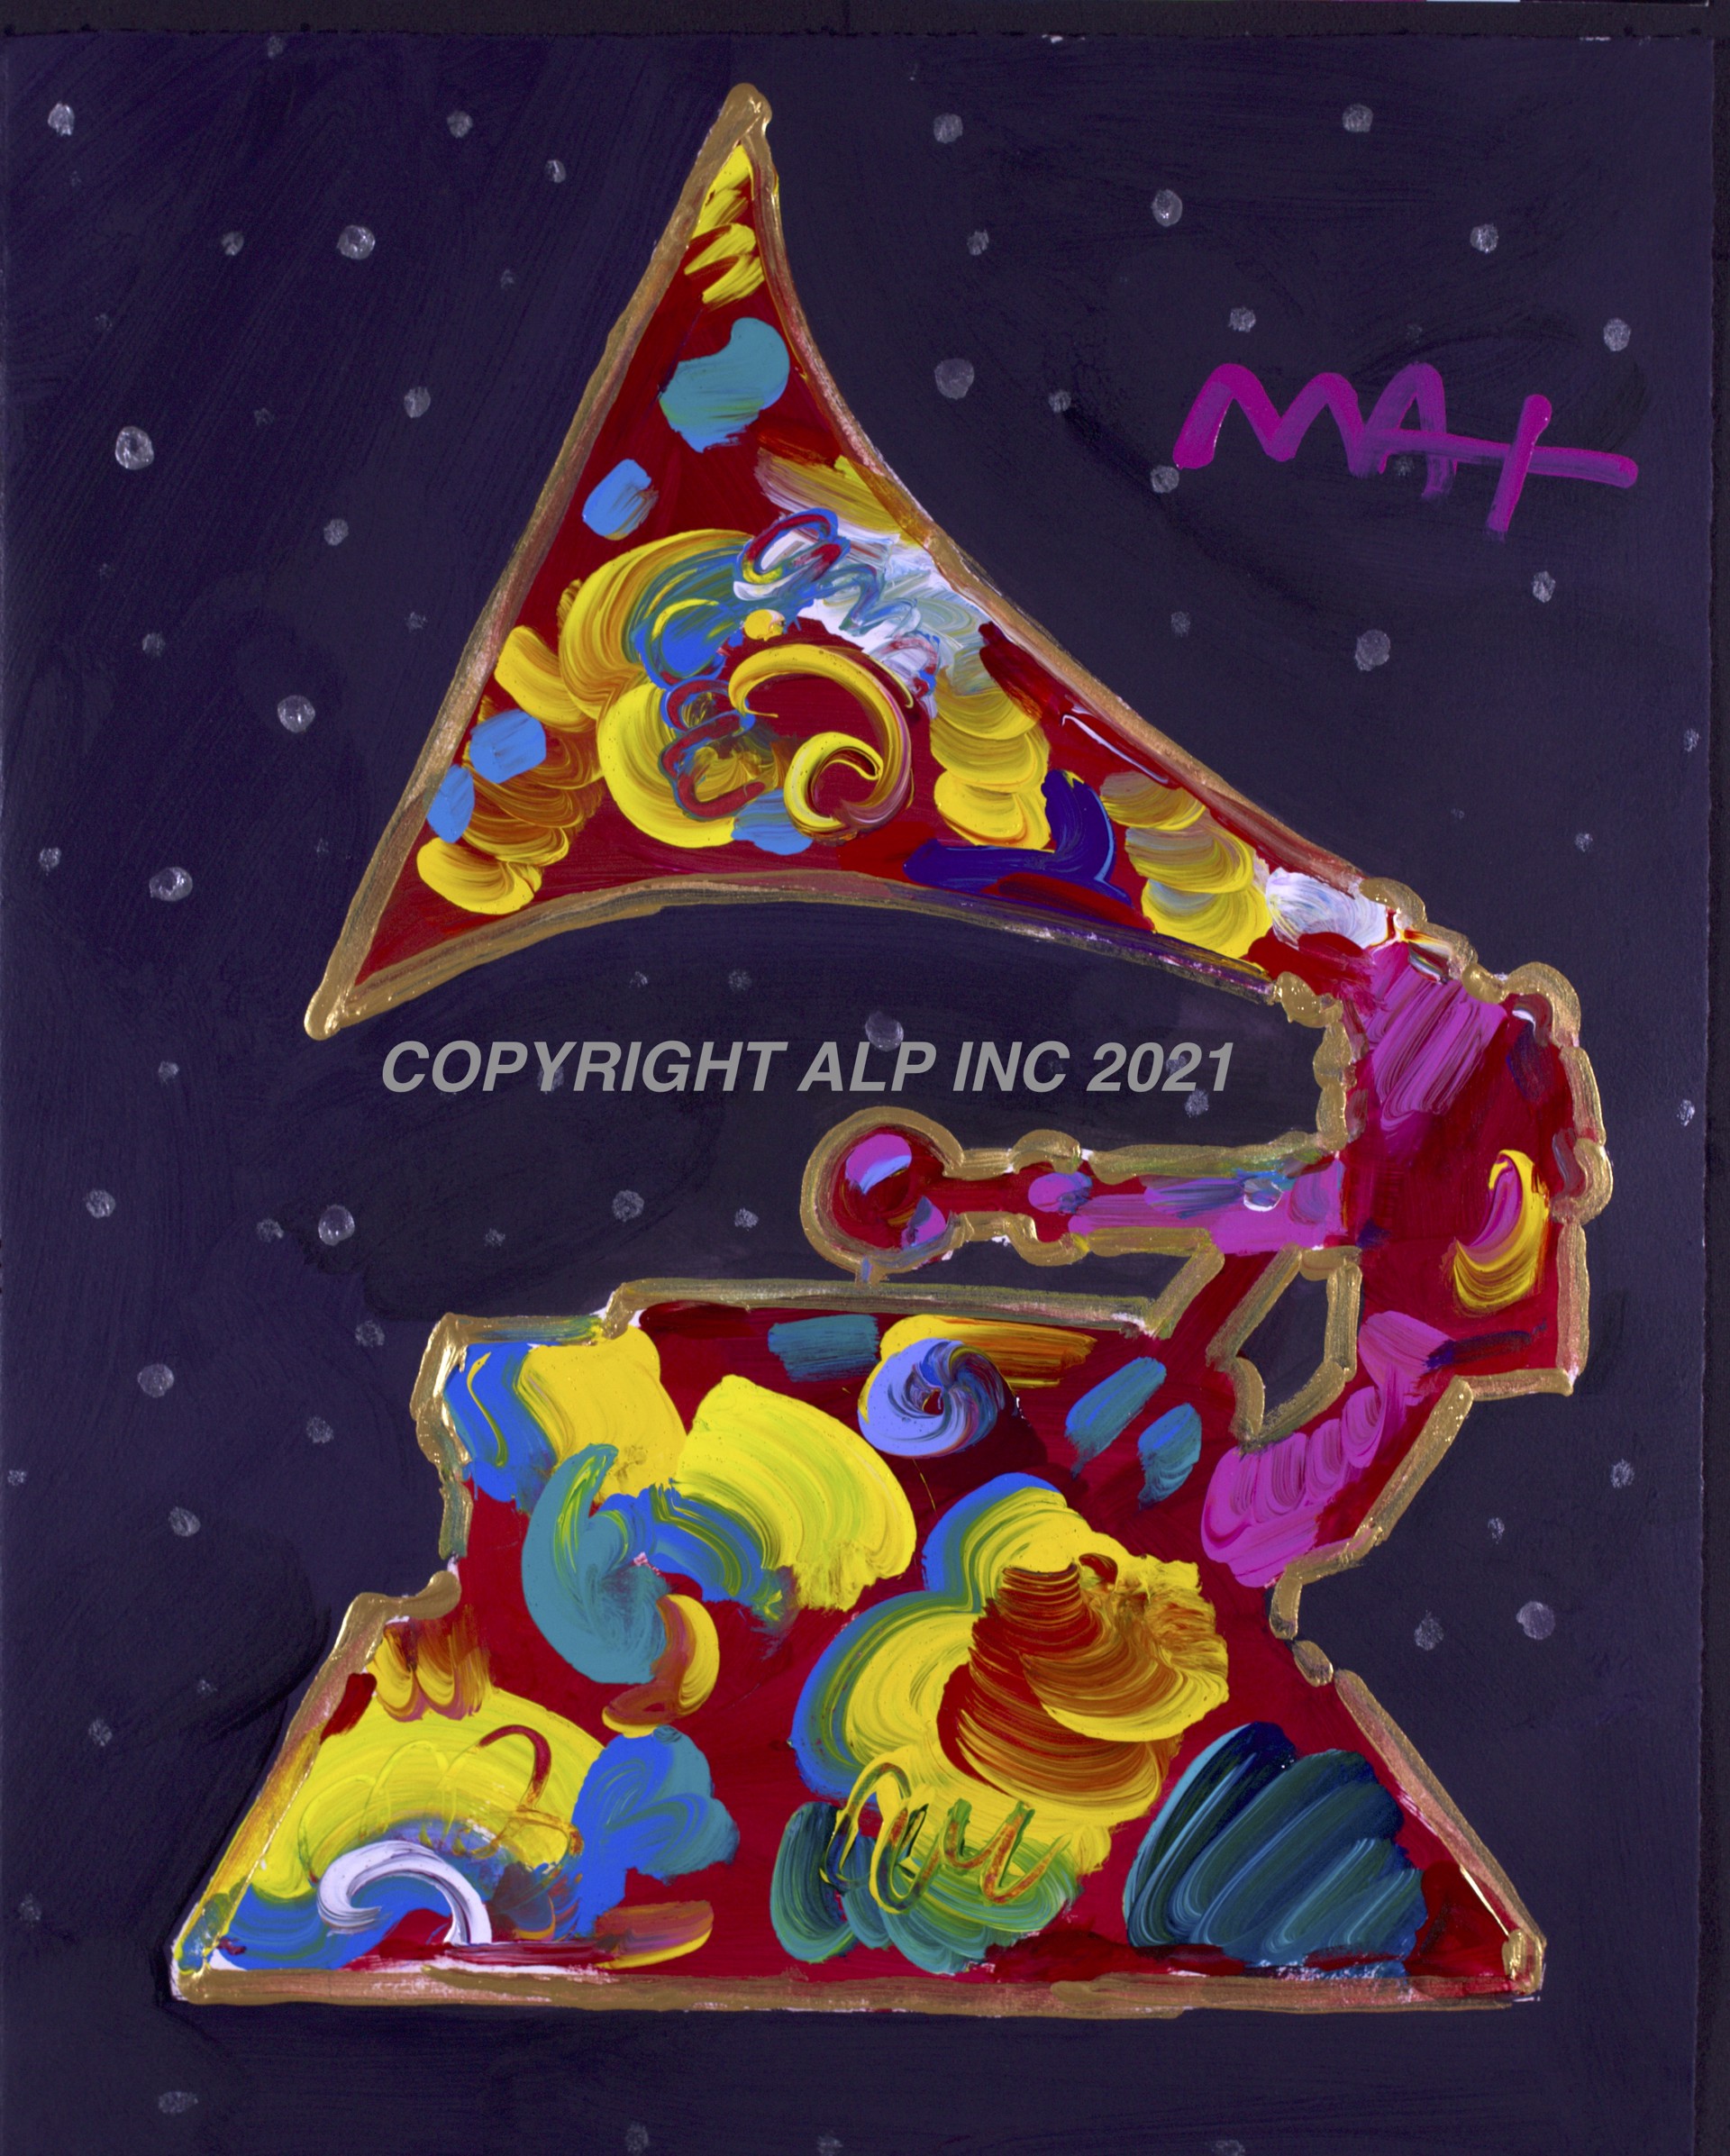 Grammy 1991 by Peter Max